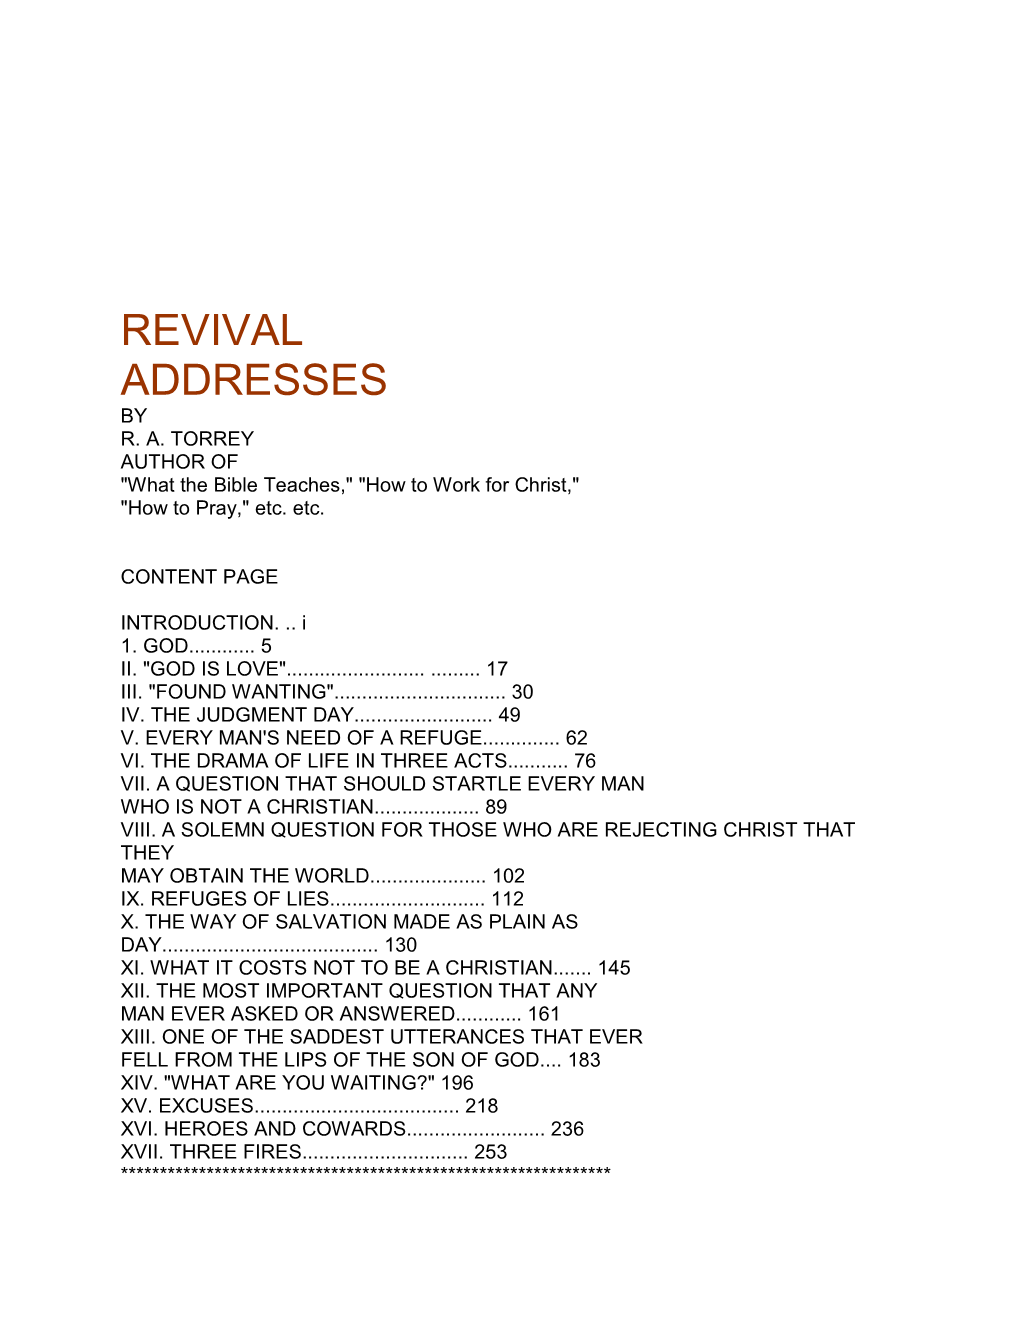 Revival Addresses by R